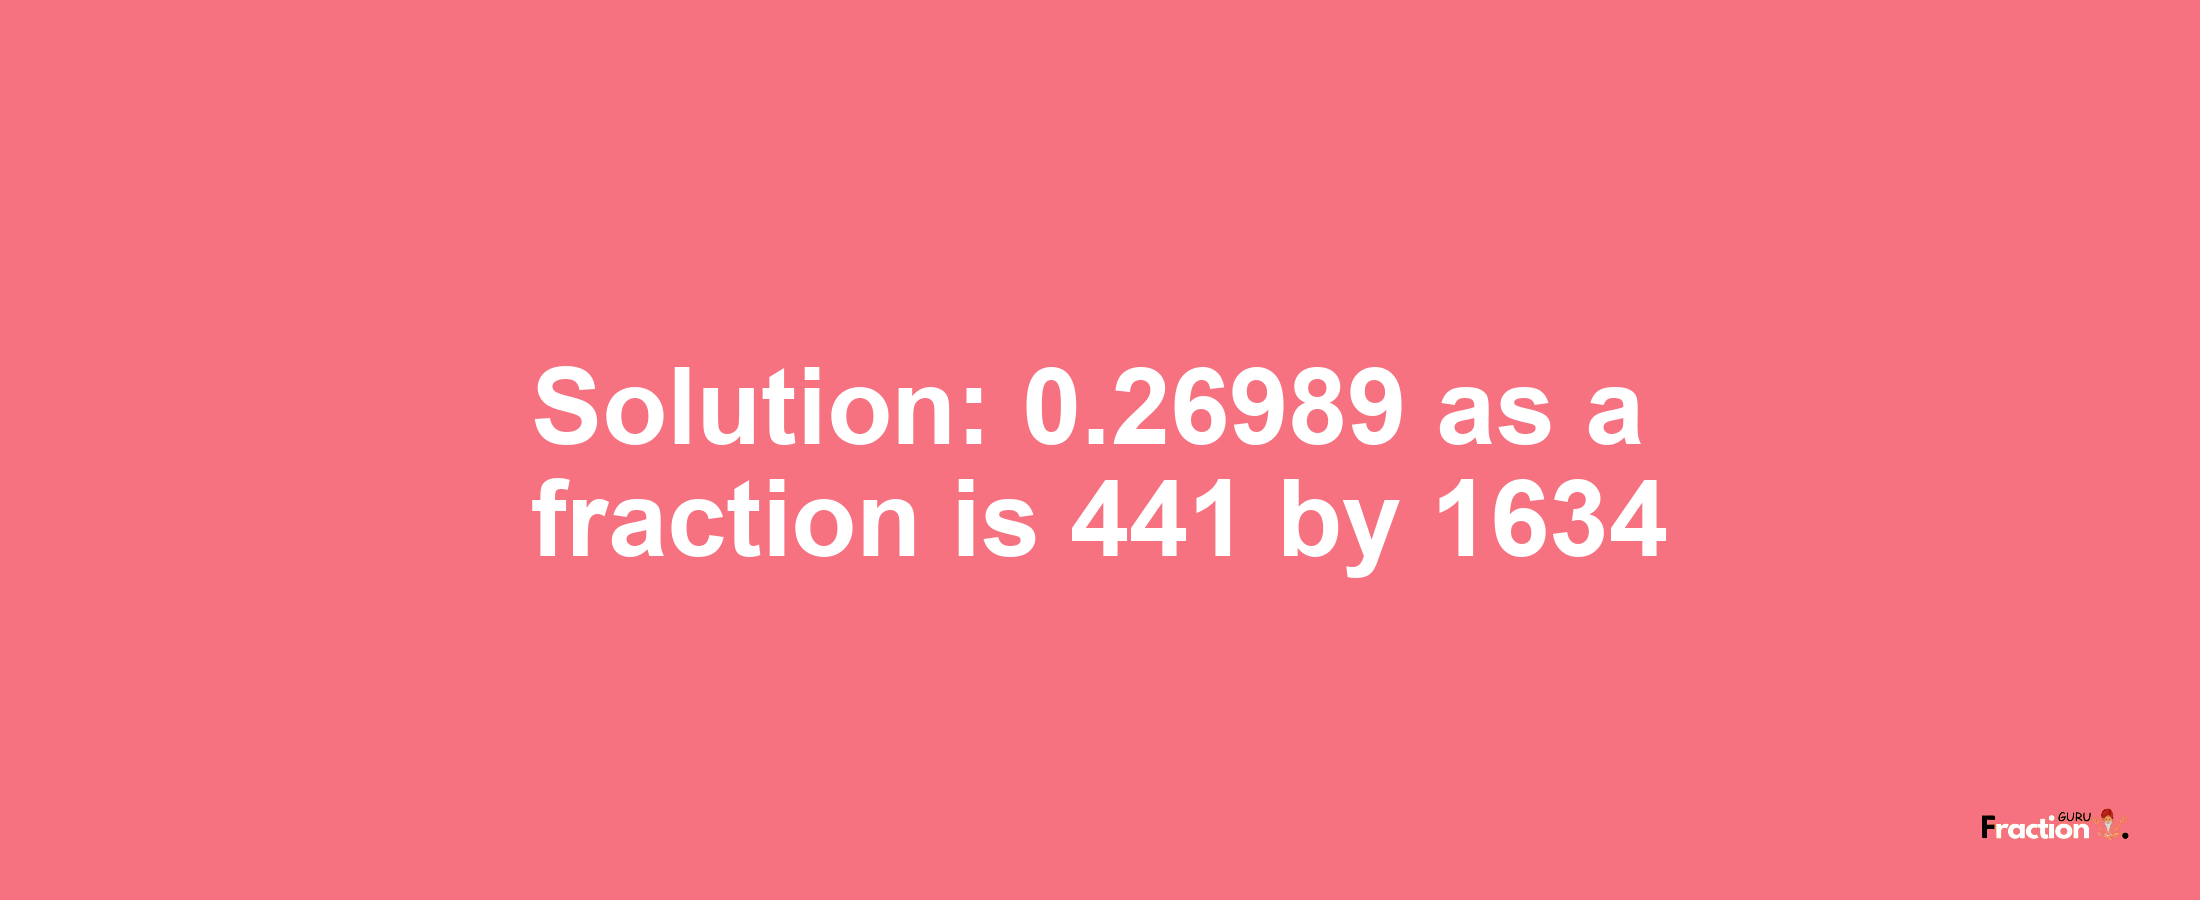 Solution:0.26989 as a fraction is 441/1634